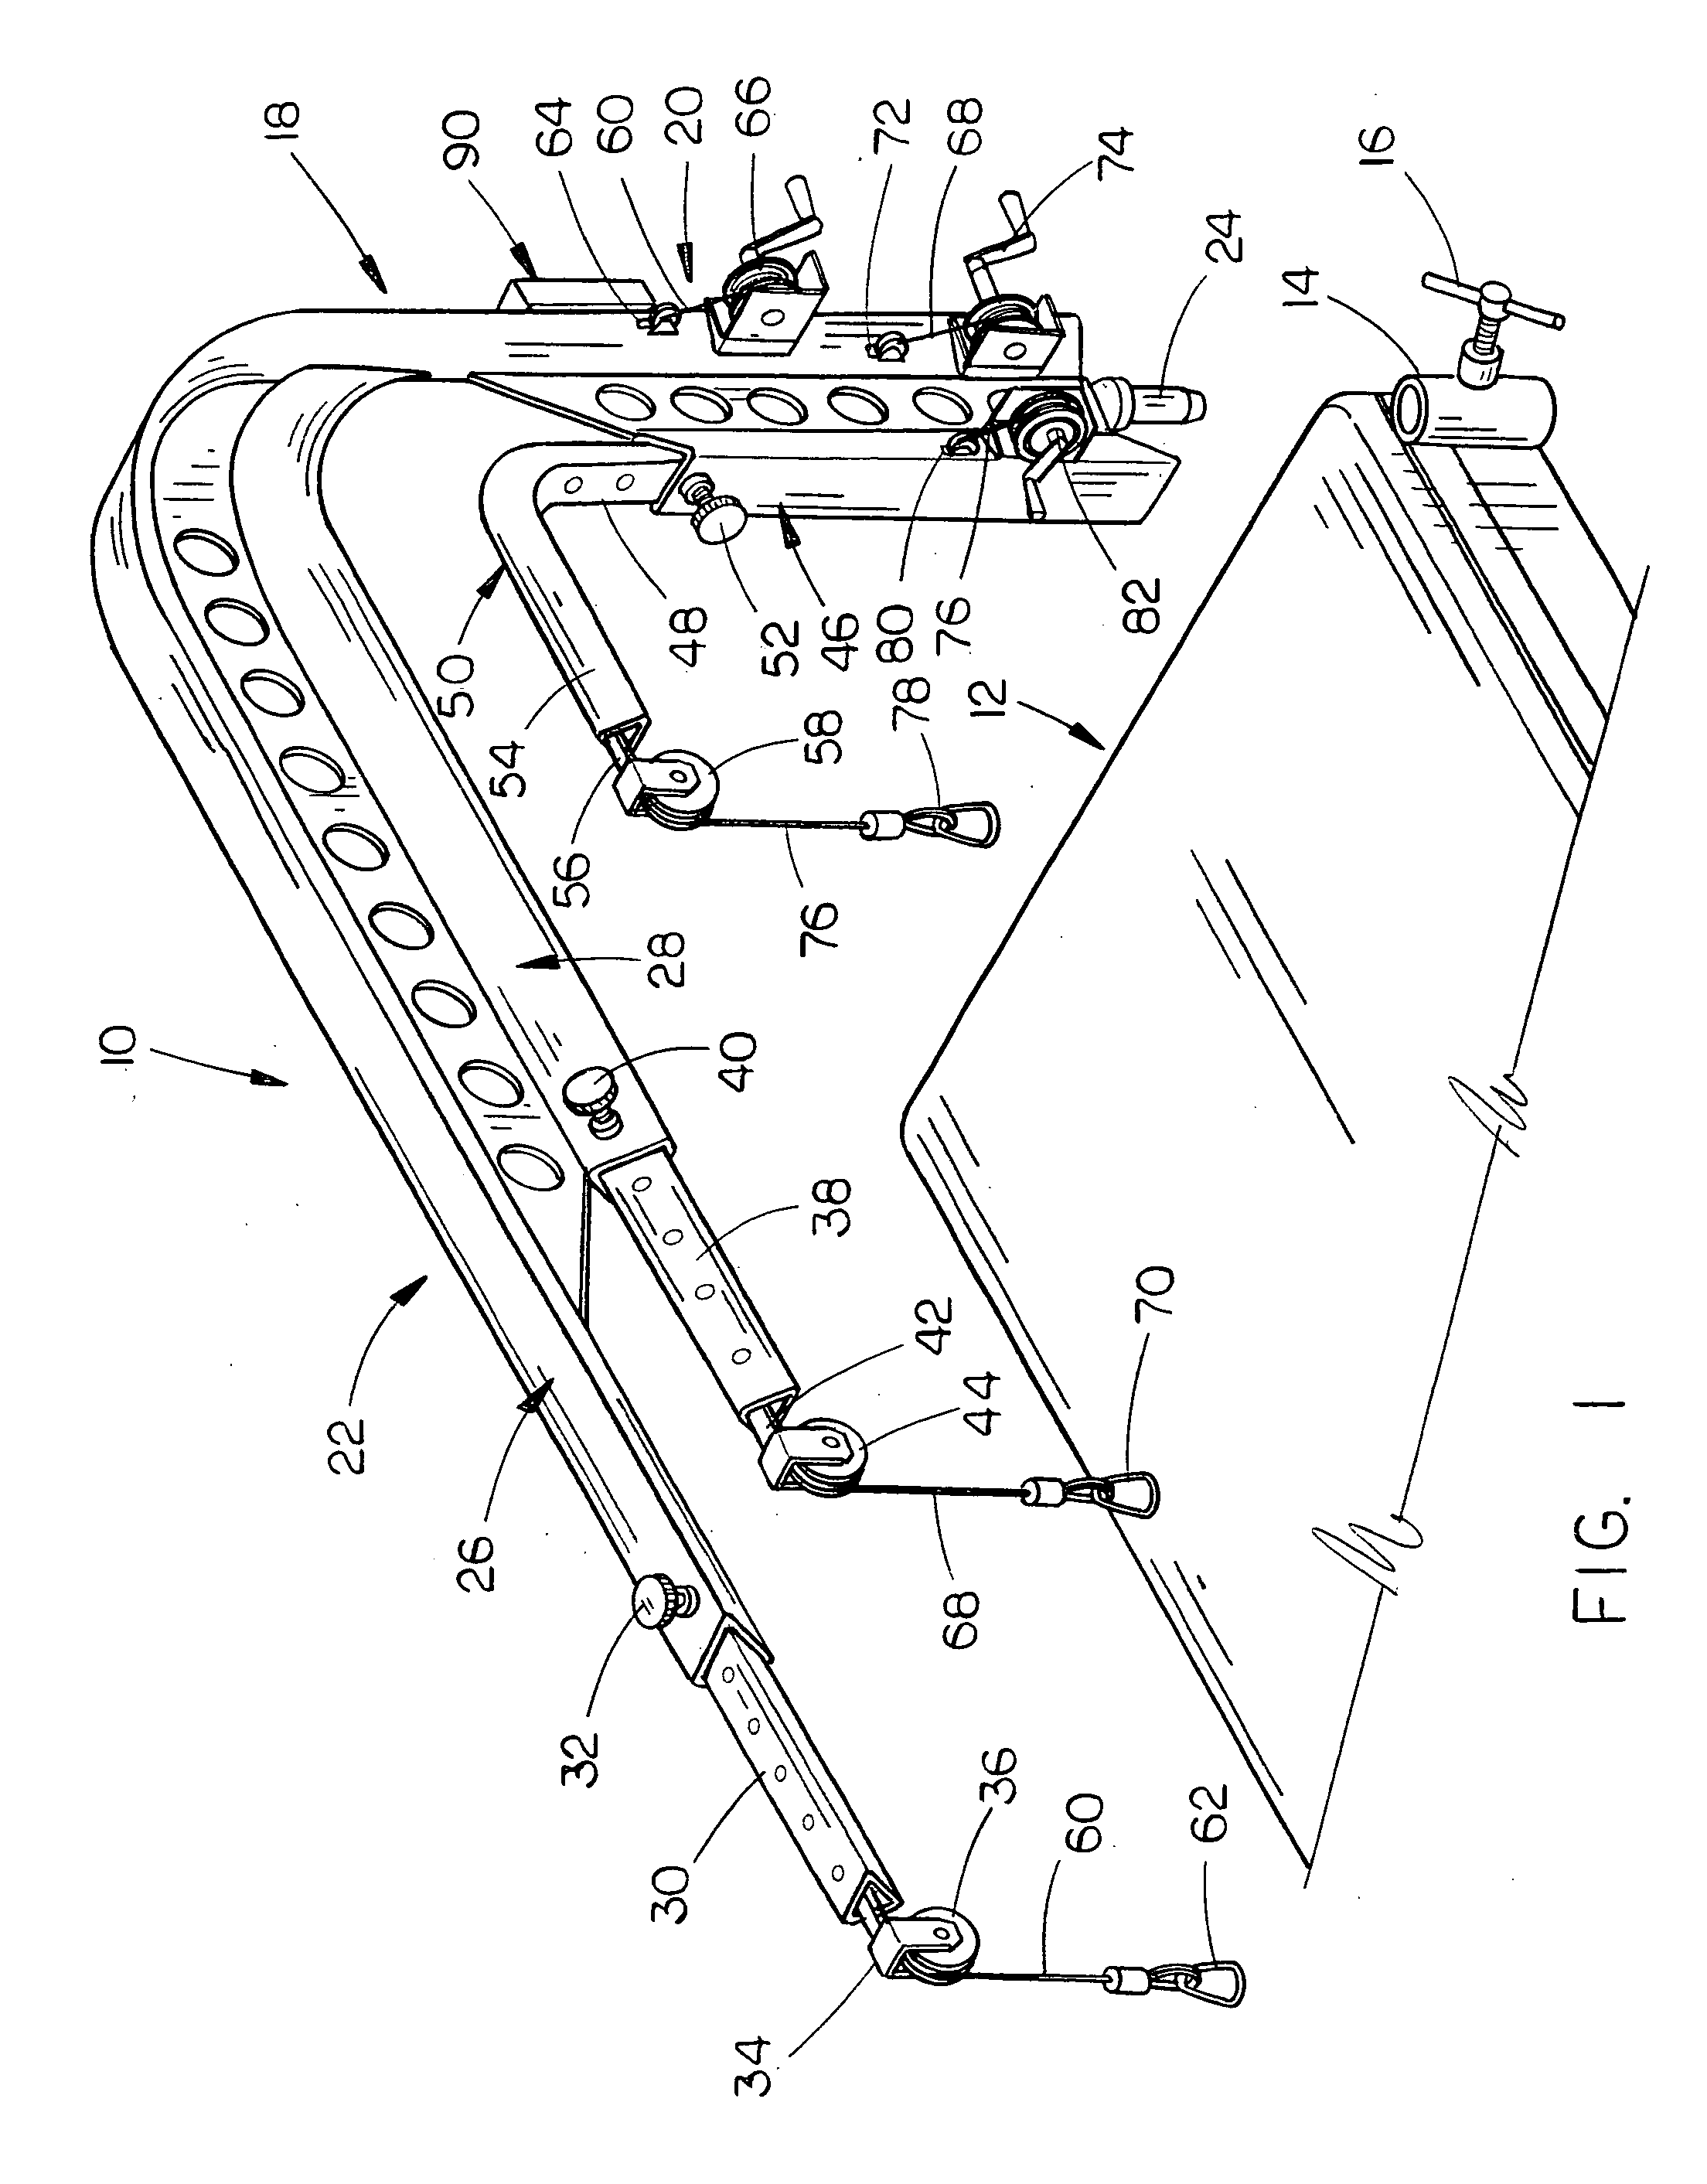 Traction device for use in surgery